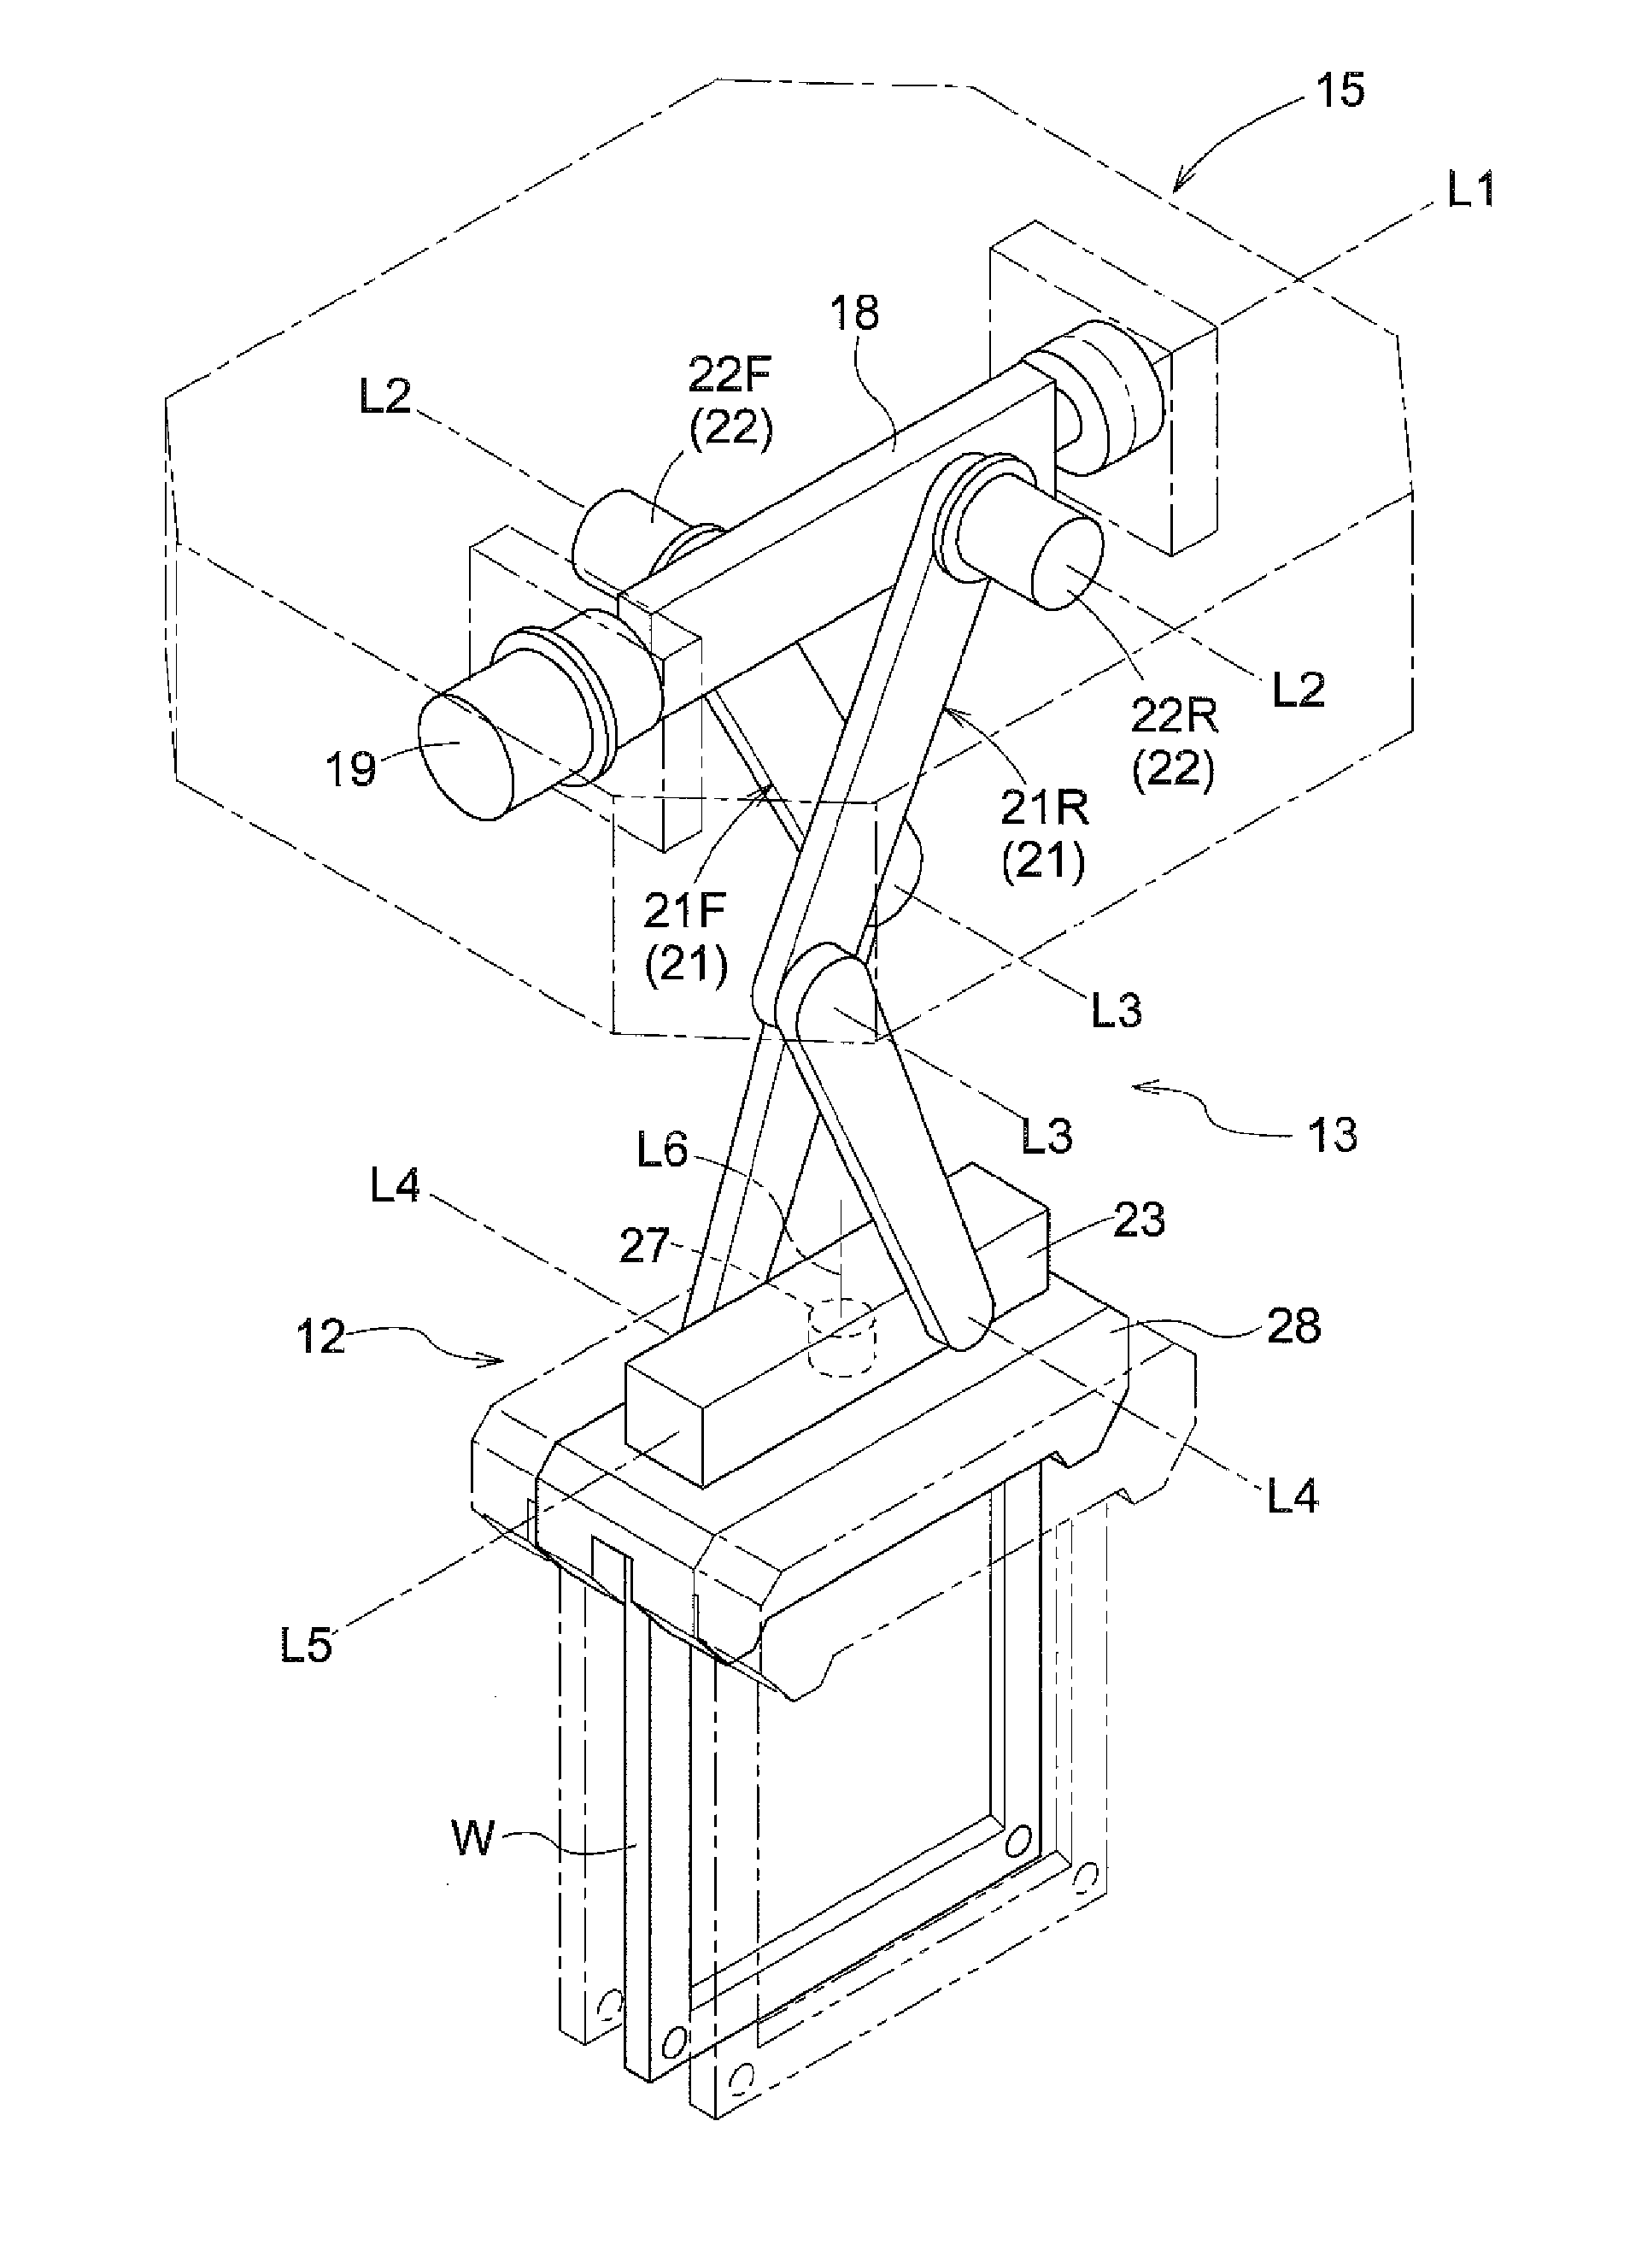 Ceiling transport vehicle and article transport facility